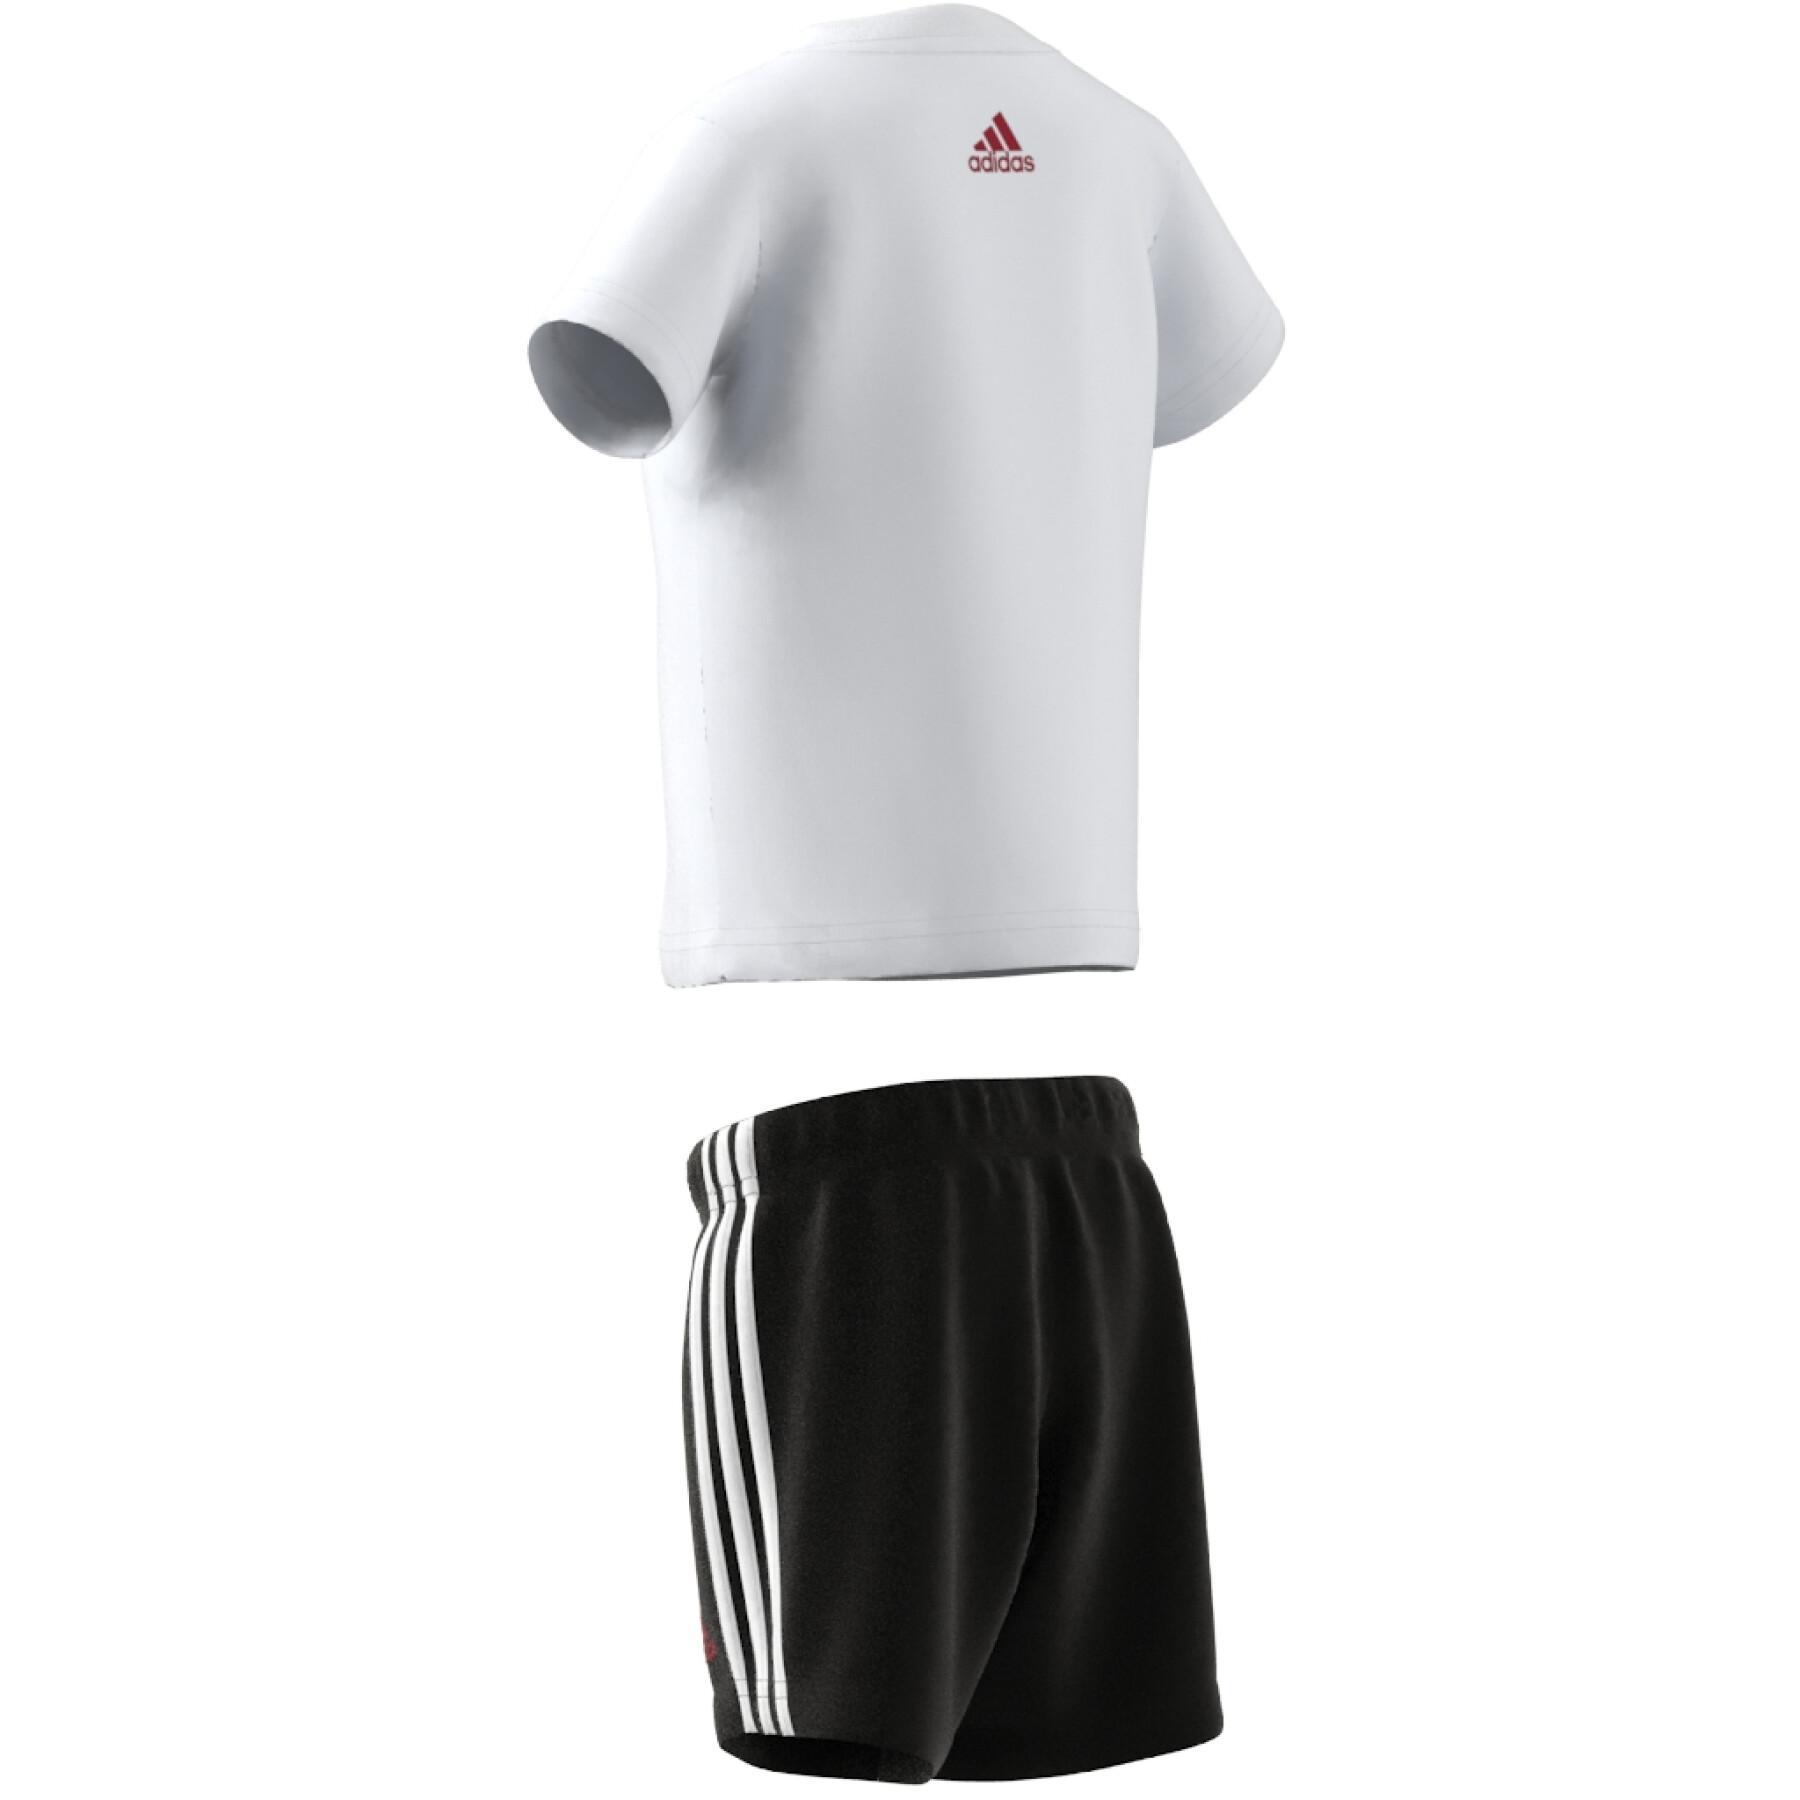 Organic cotton t-shirt and shorts set adidas 3-Stripes Essentials Lineage -  adidas - Brands - Lifestyle